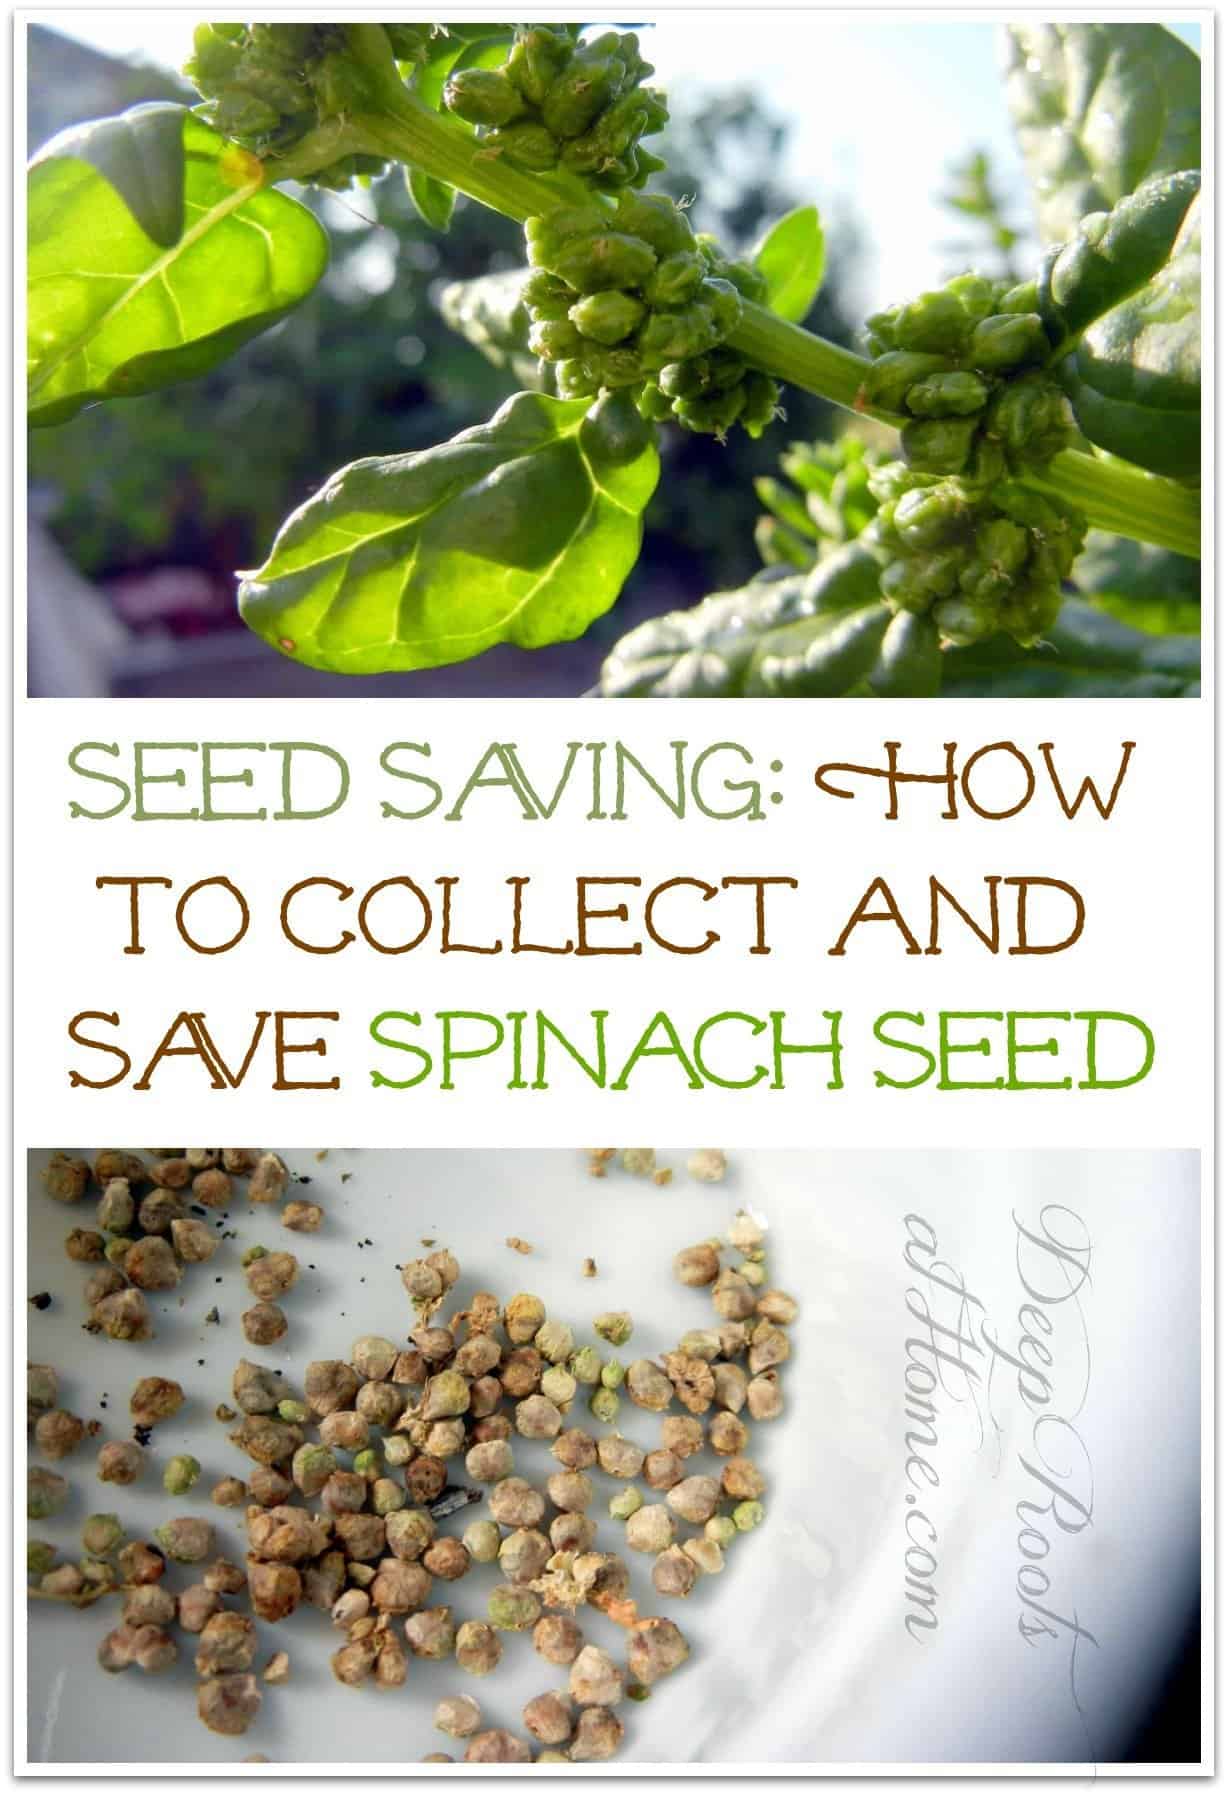 Seed Saving: How To Collect and Save Spinach Seed. Pinterest image